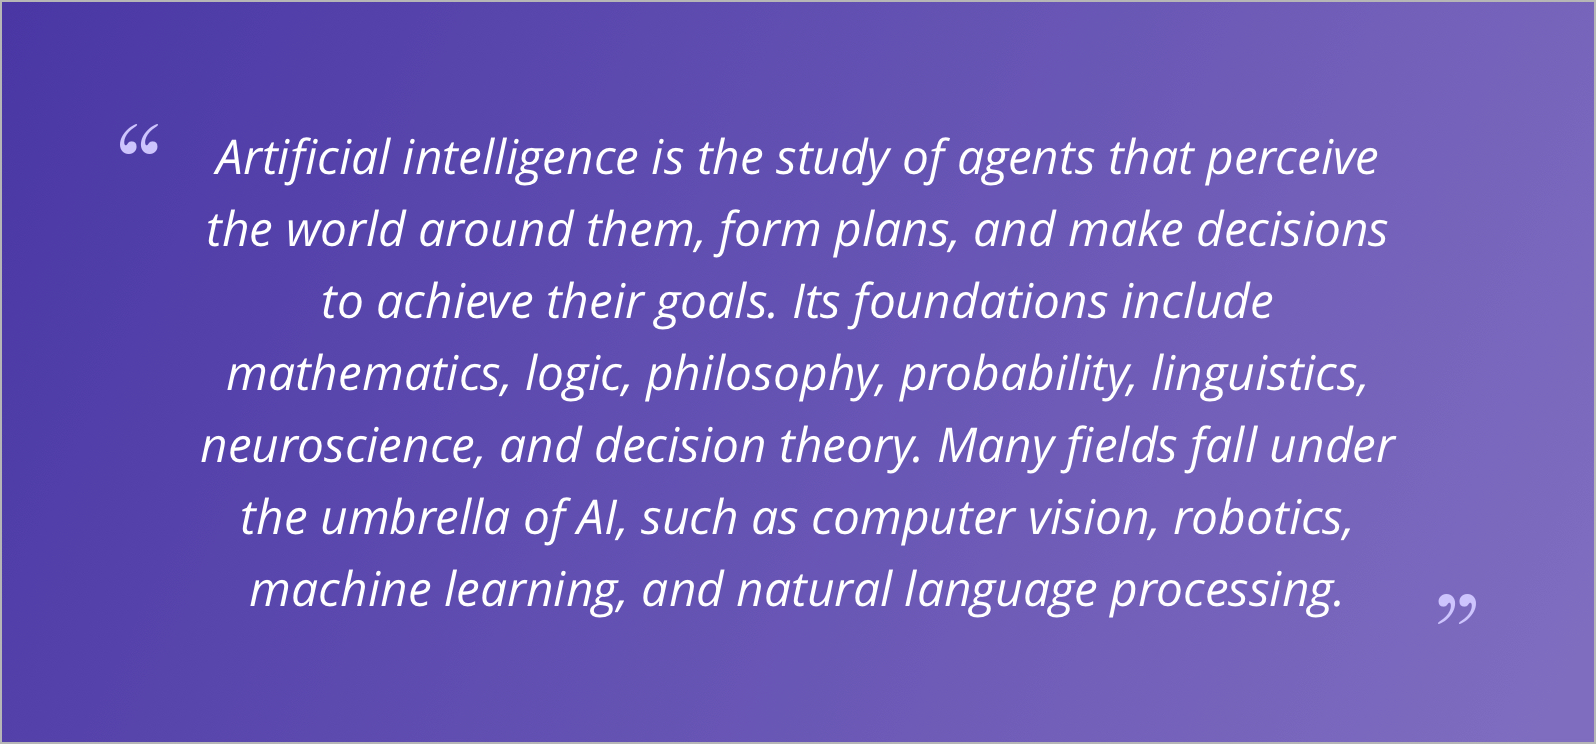 artificial-intelligence-quote